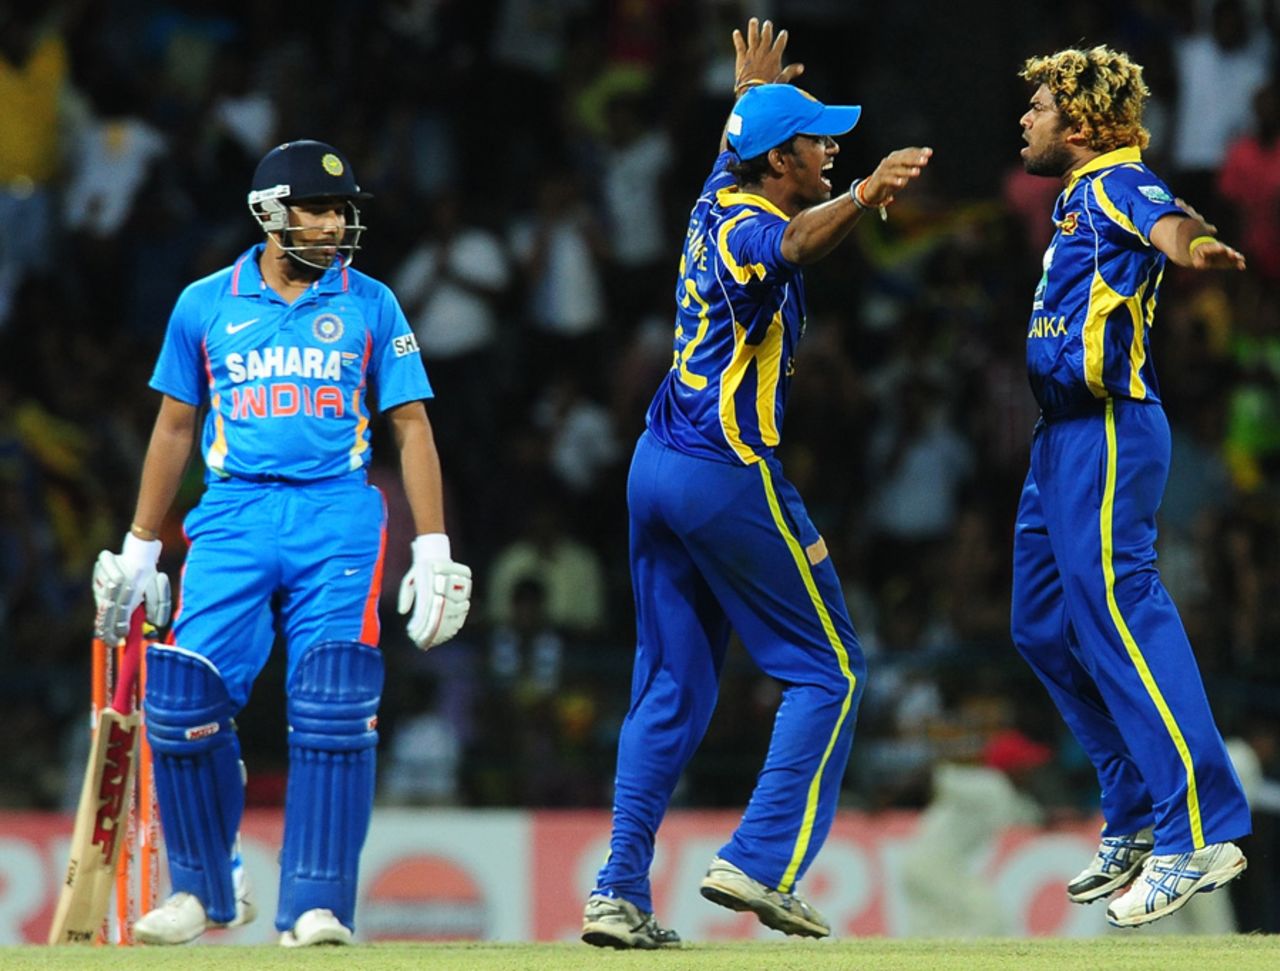 Rohit Sharma was dismissed for a first ball-duck by Lasith Malinga, Sri Lanka v India, 3rd ODI, Colombo, July 28, 2012